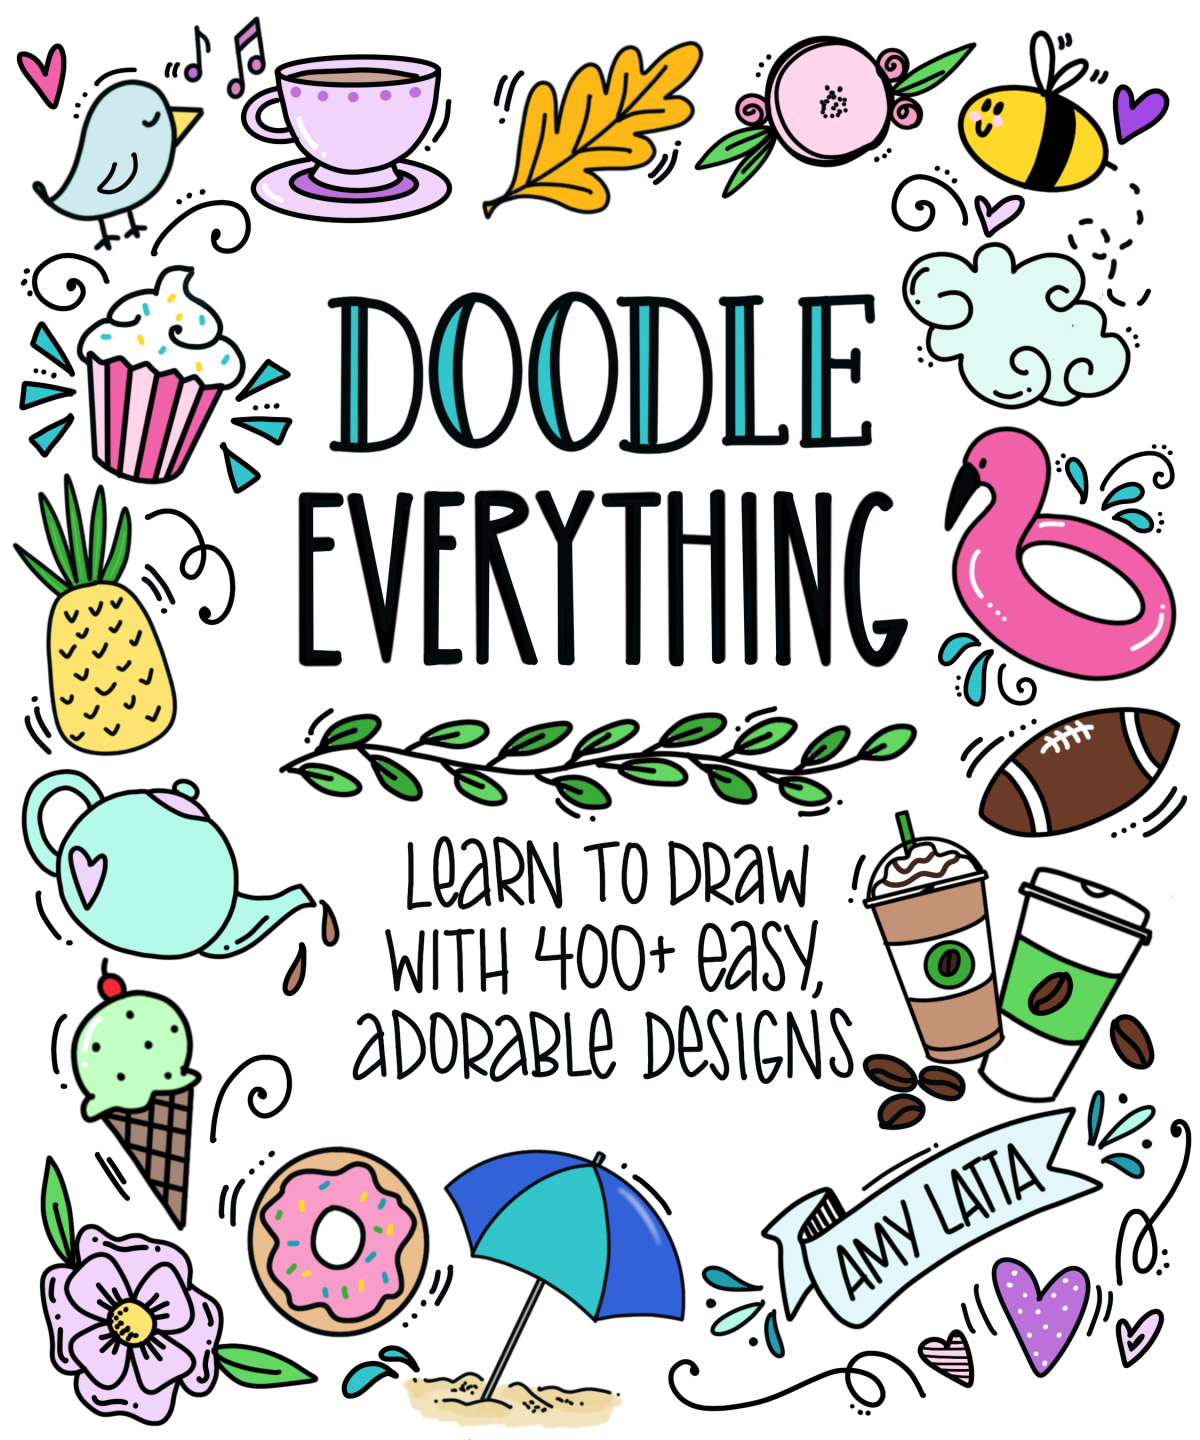 Image is the cover of the book, "Doodle Everything," by Amy Latta.